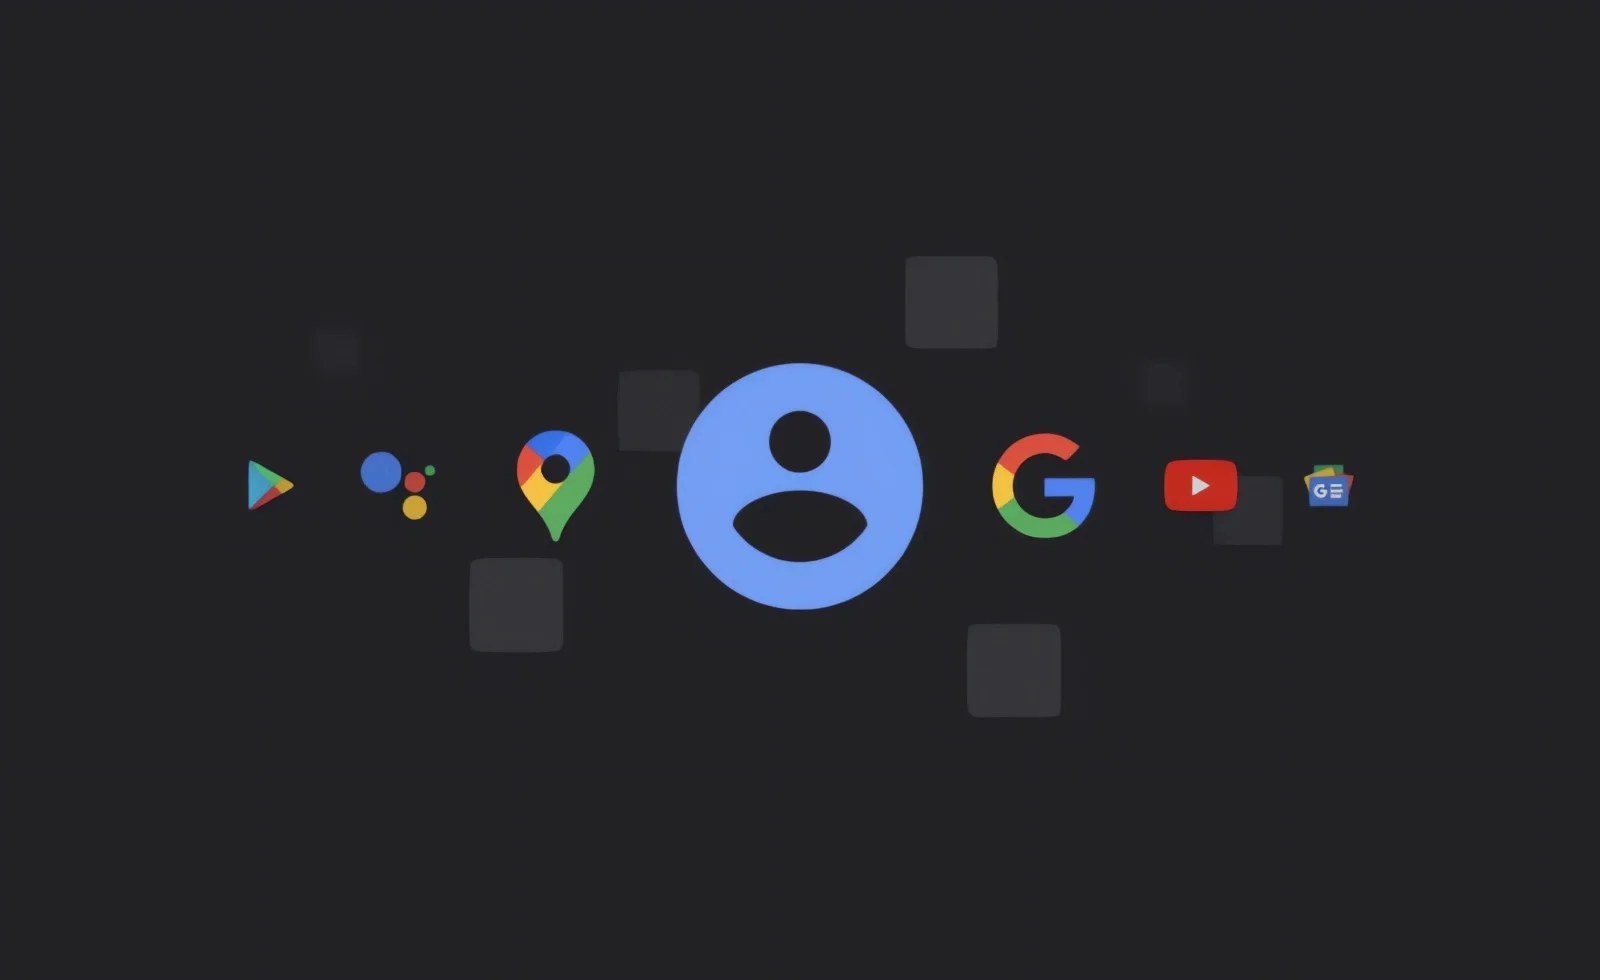 Google Activity Permissions Controller: Manage Your Account’s Permissions